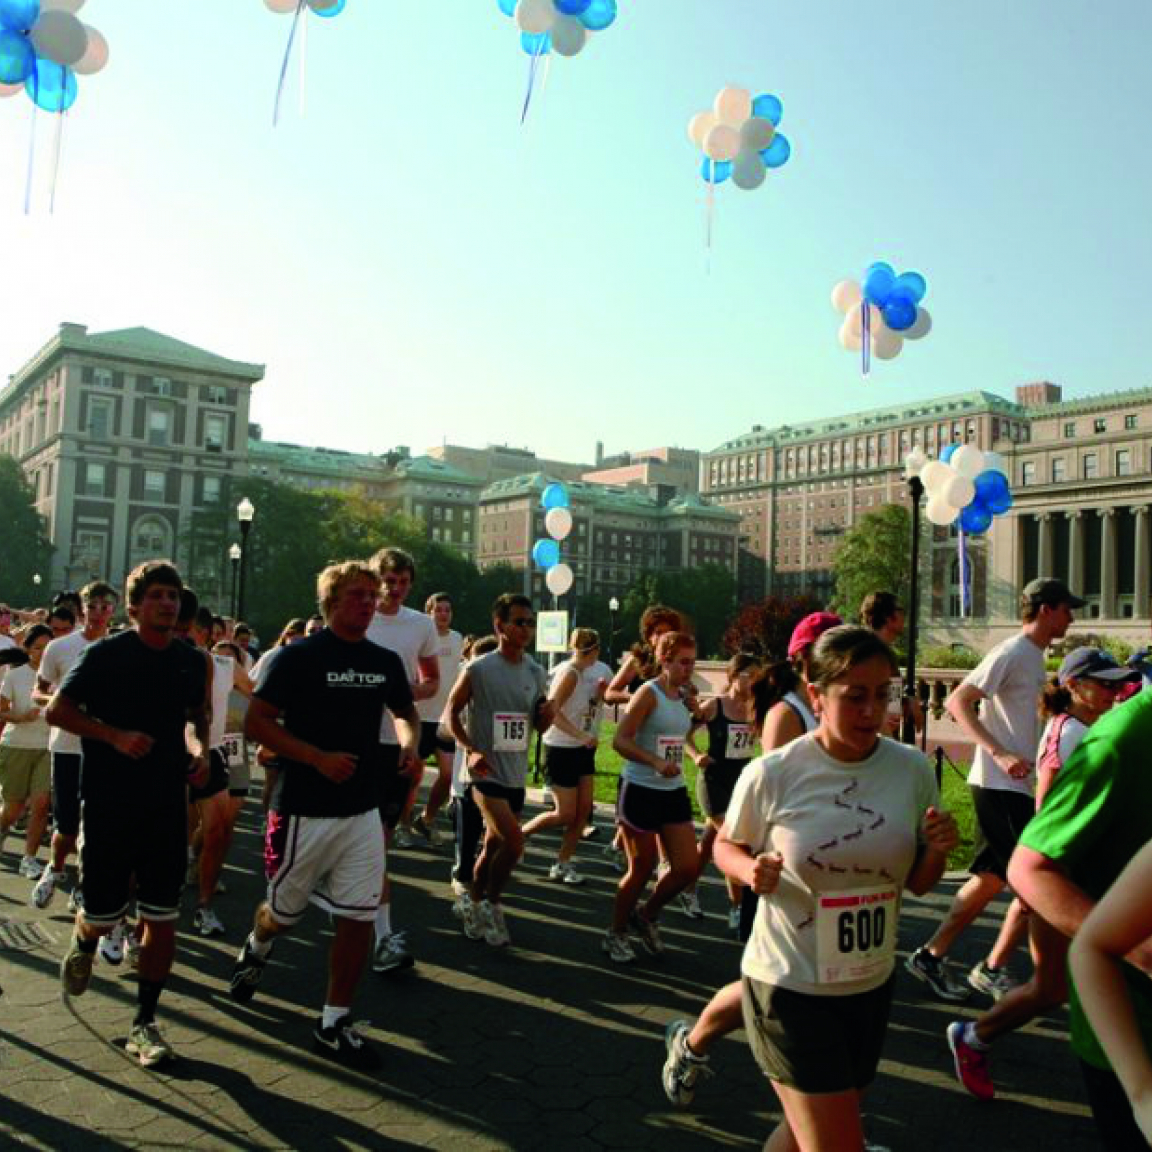 People running a 5k